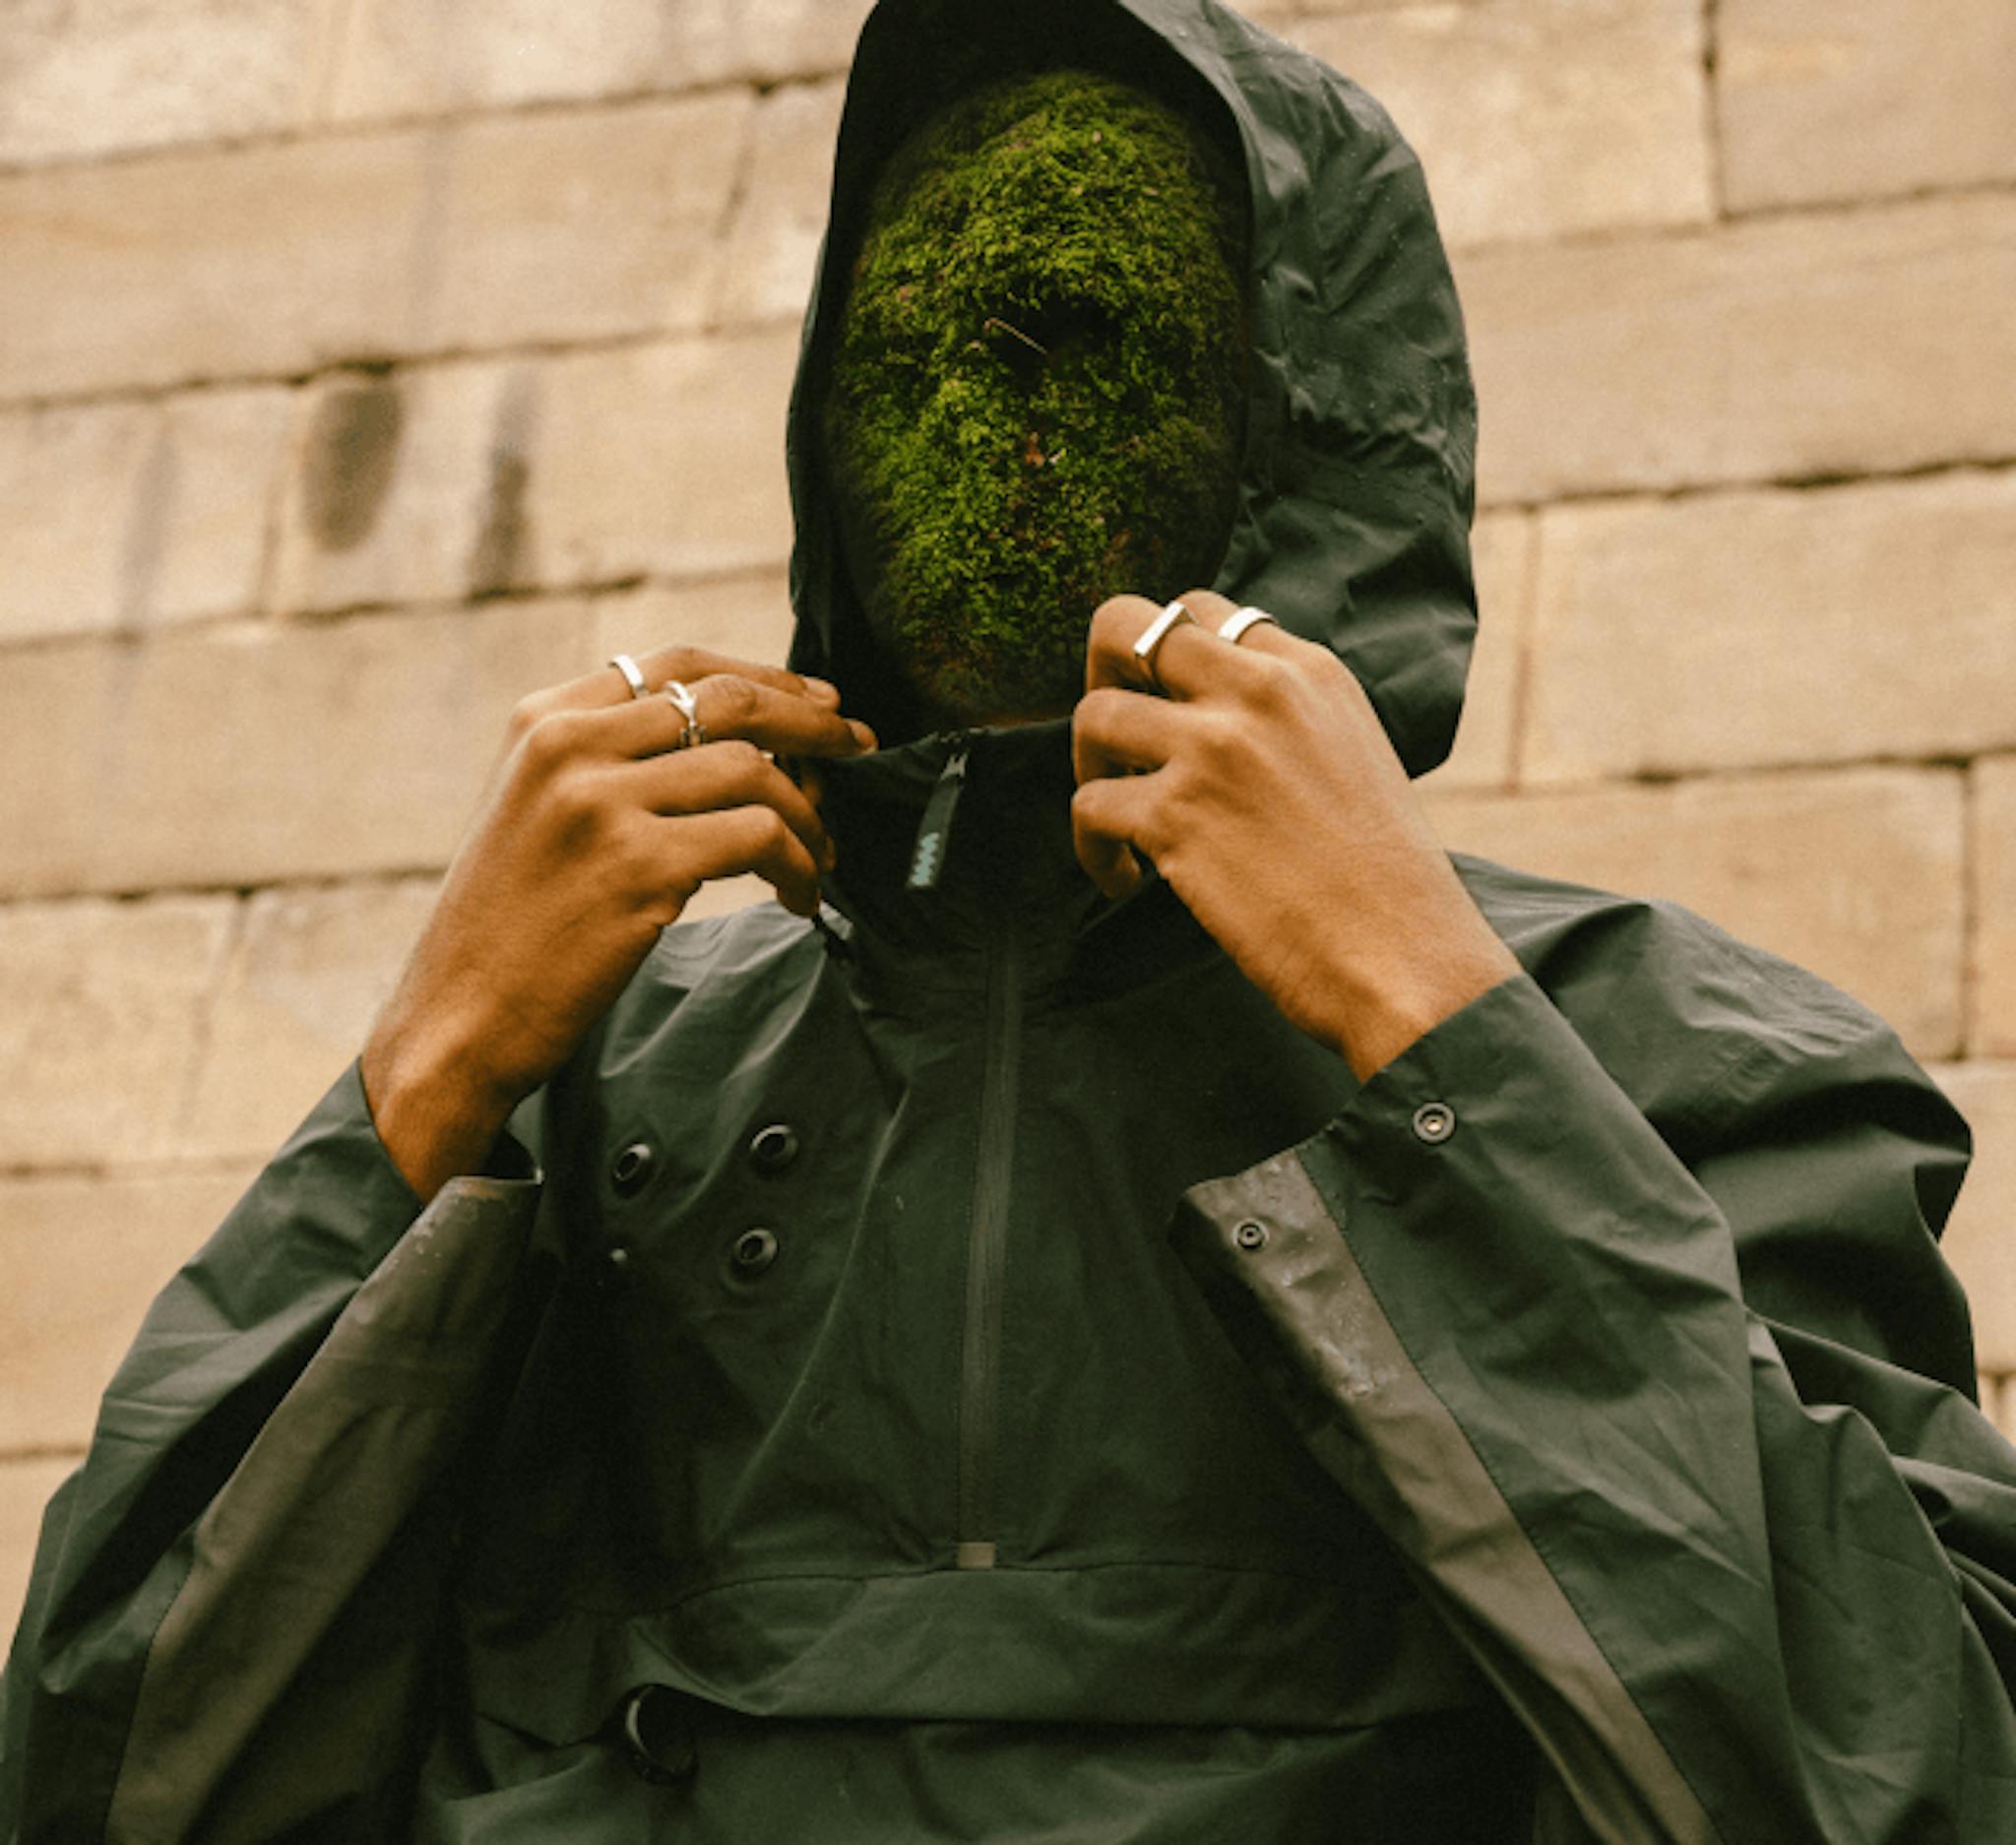 A person in a dark green hooded jacket with a moss-covered head instead of a human face, blending elements of nature with human form.